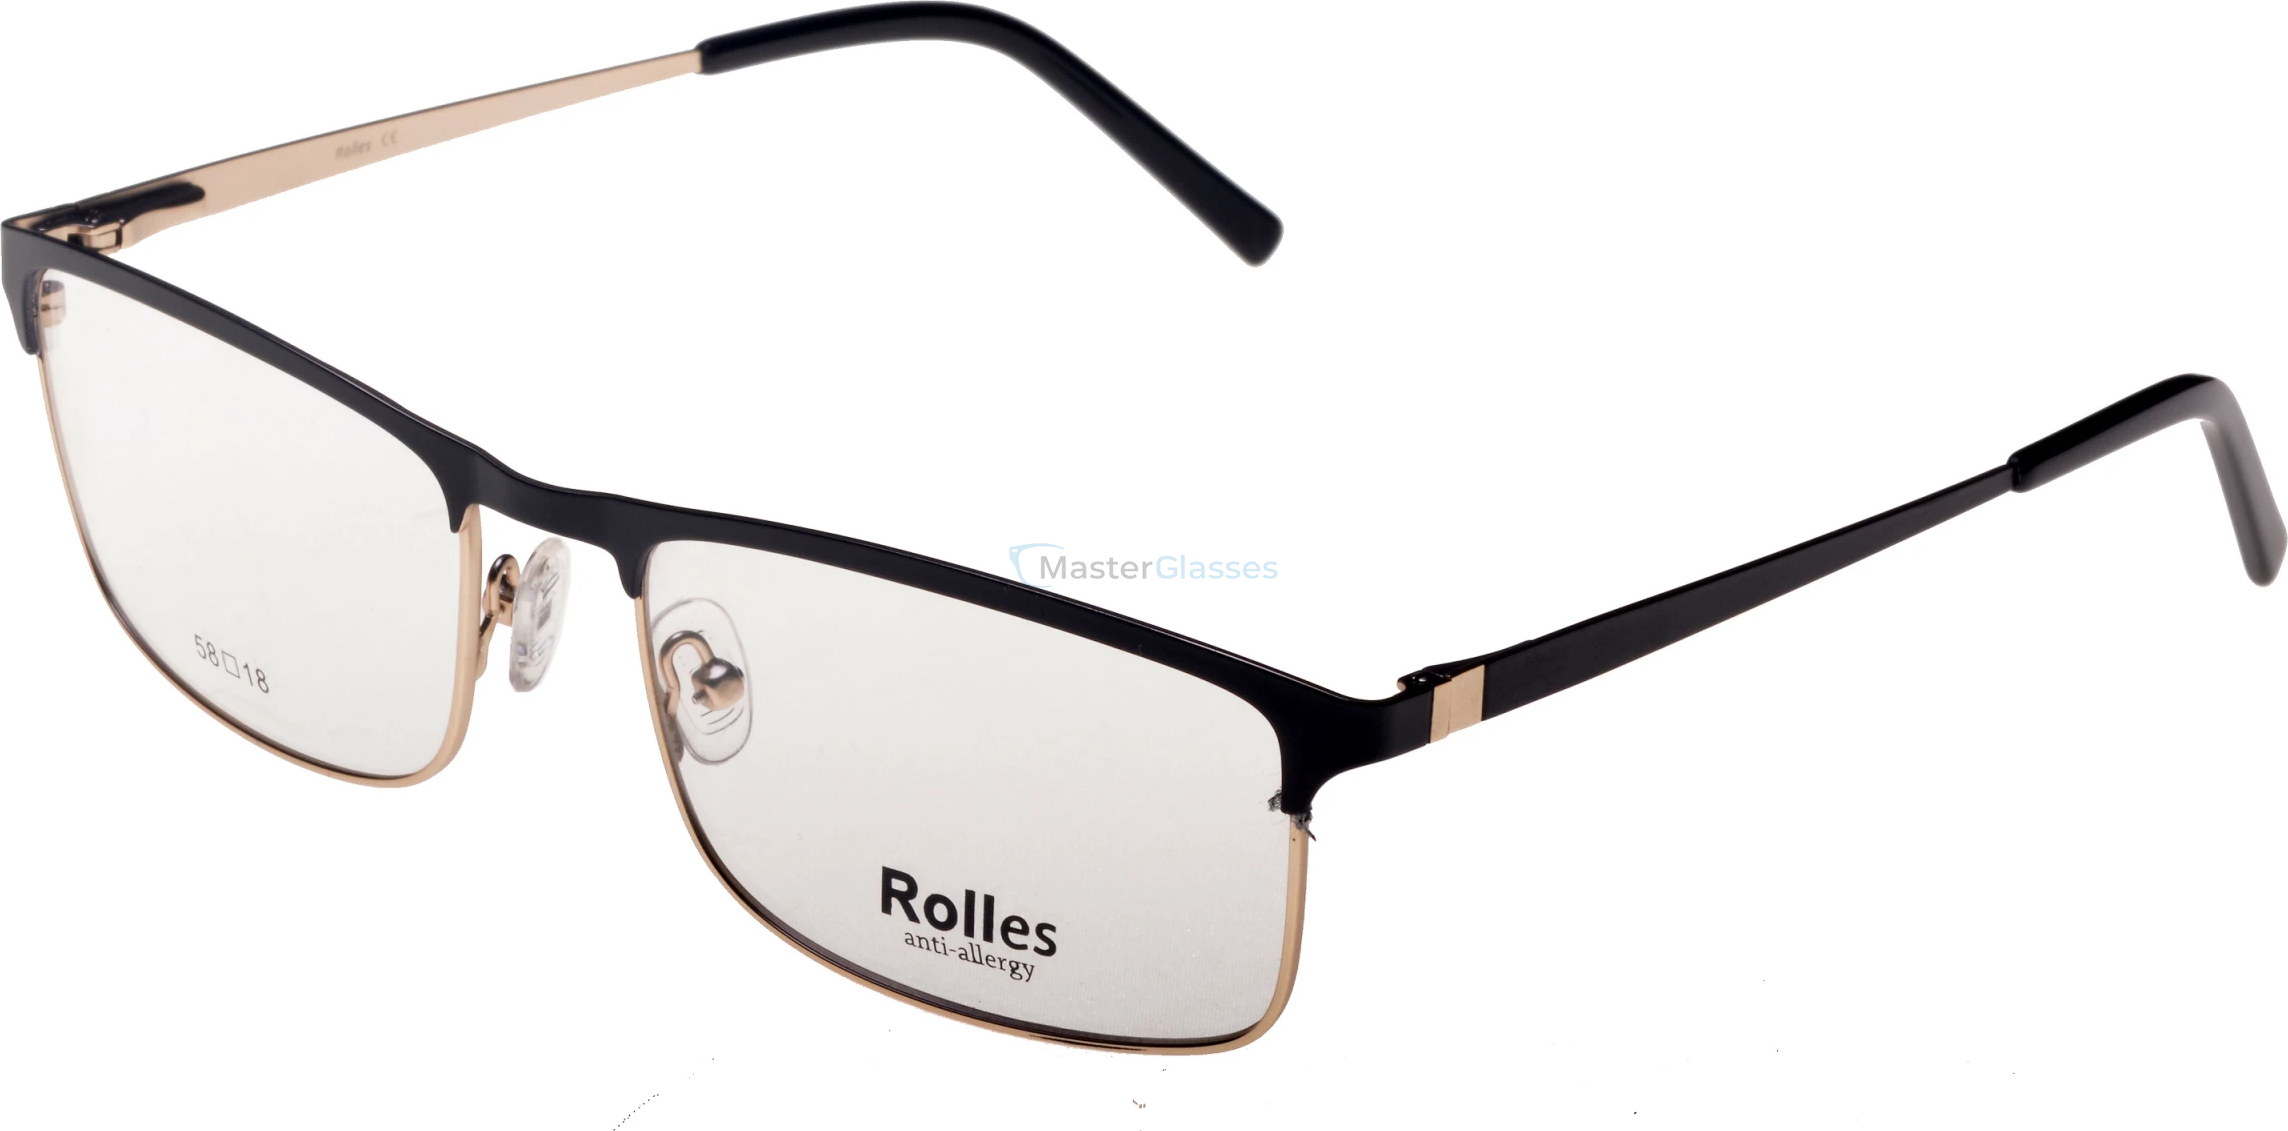  Rolles 604 02